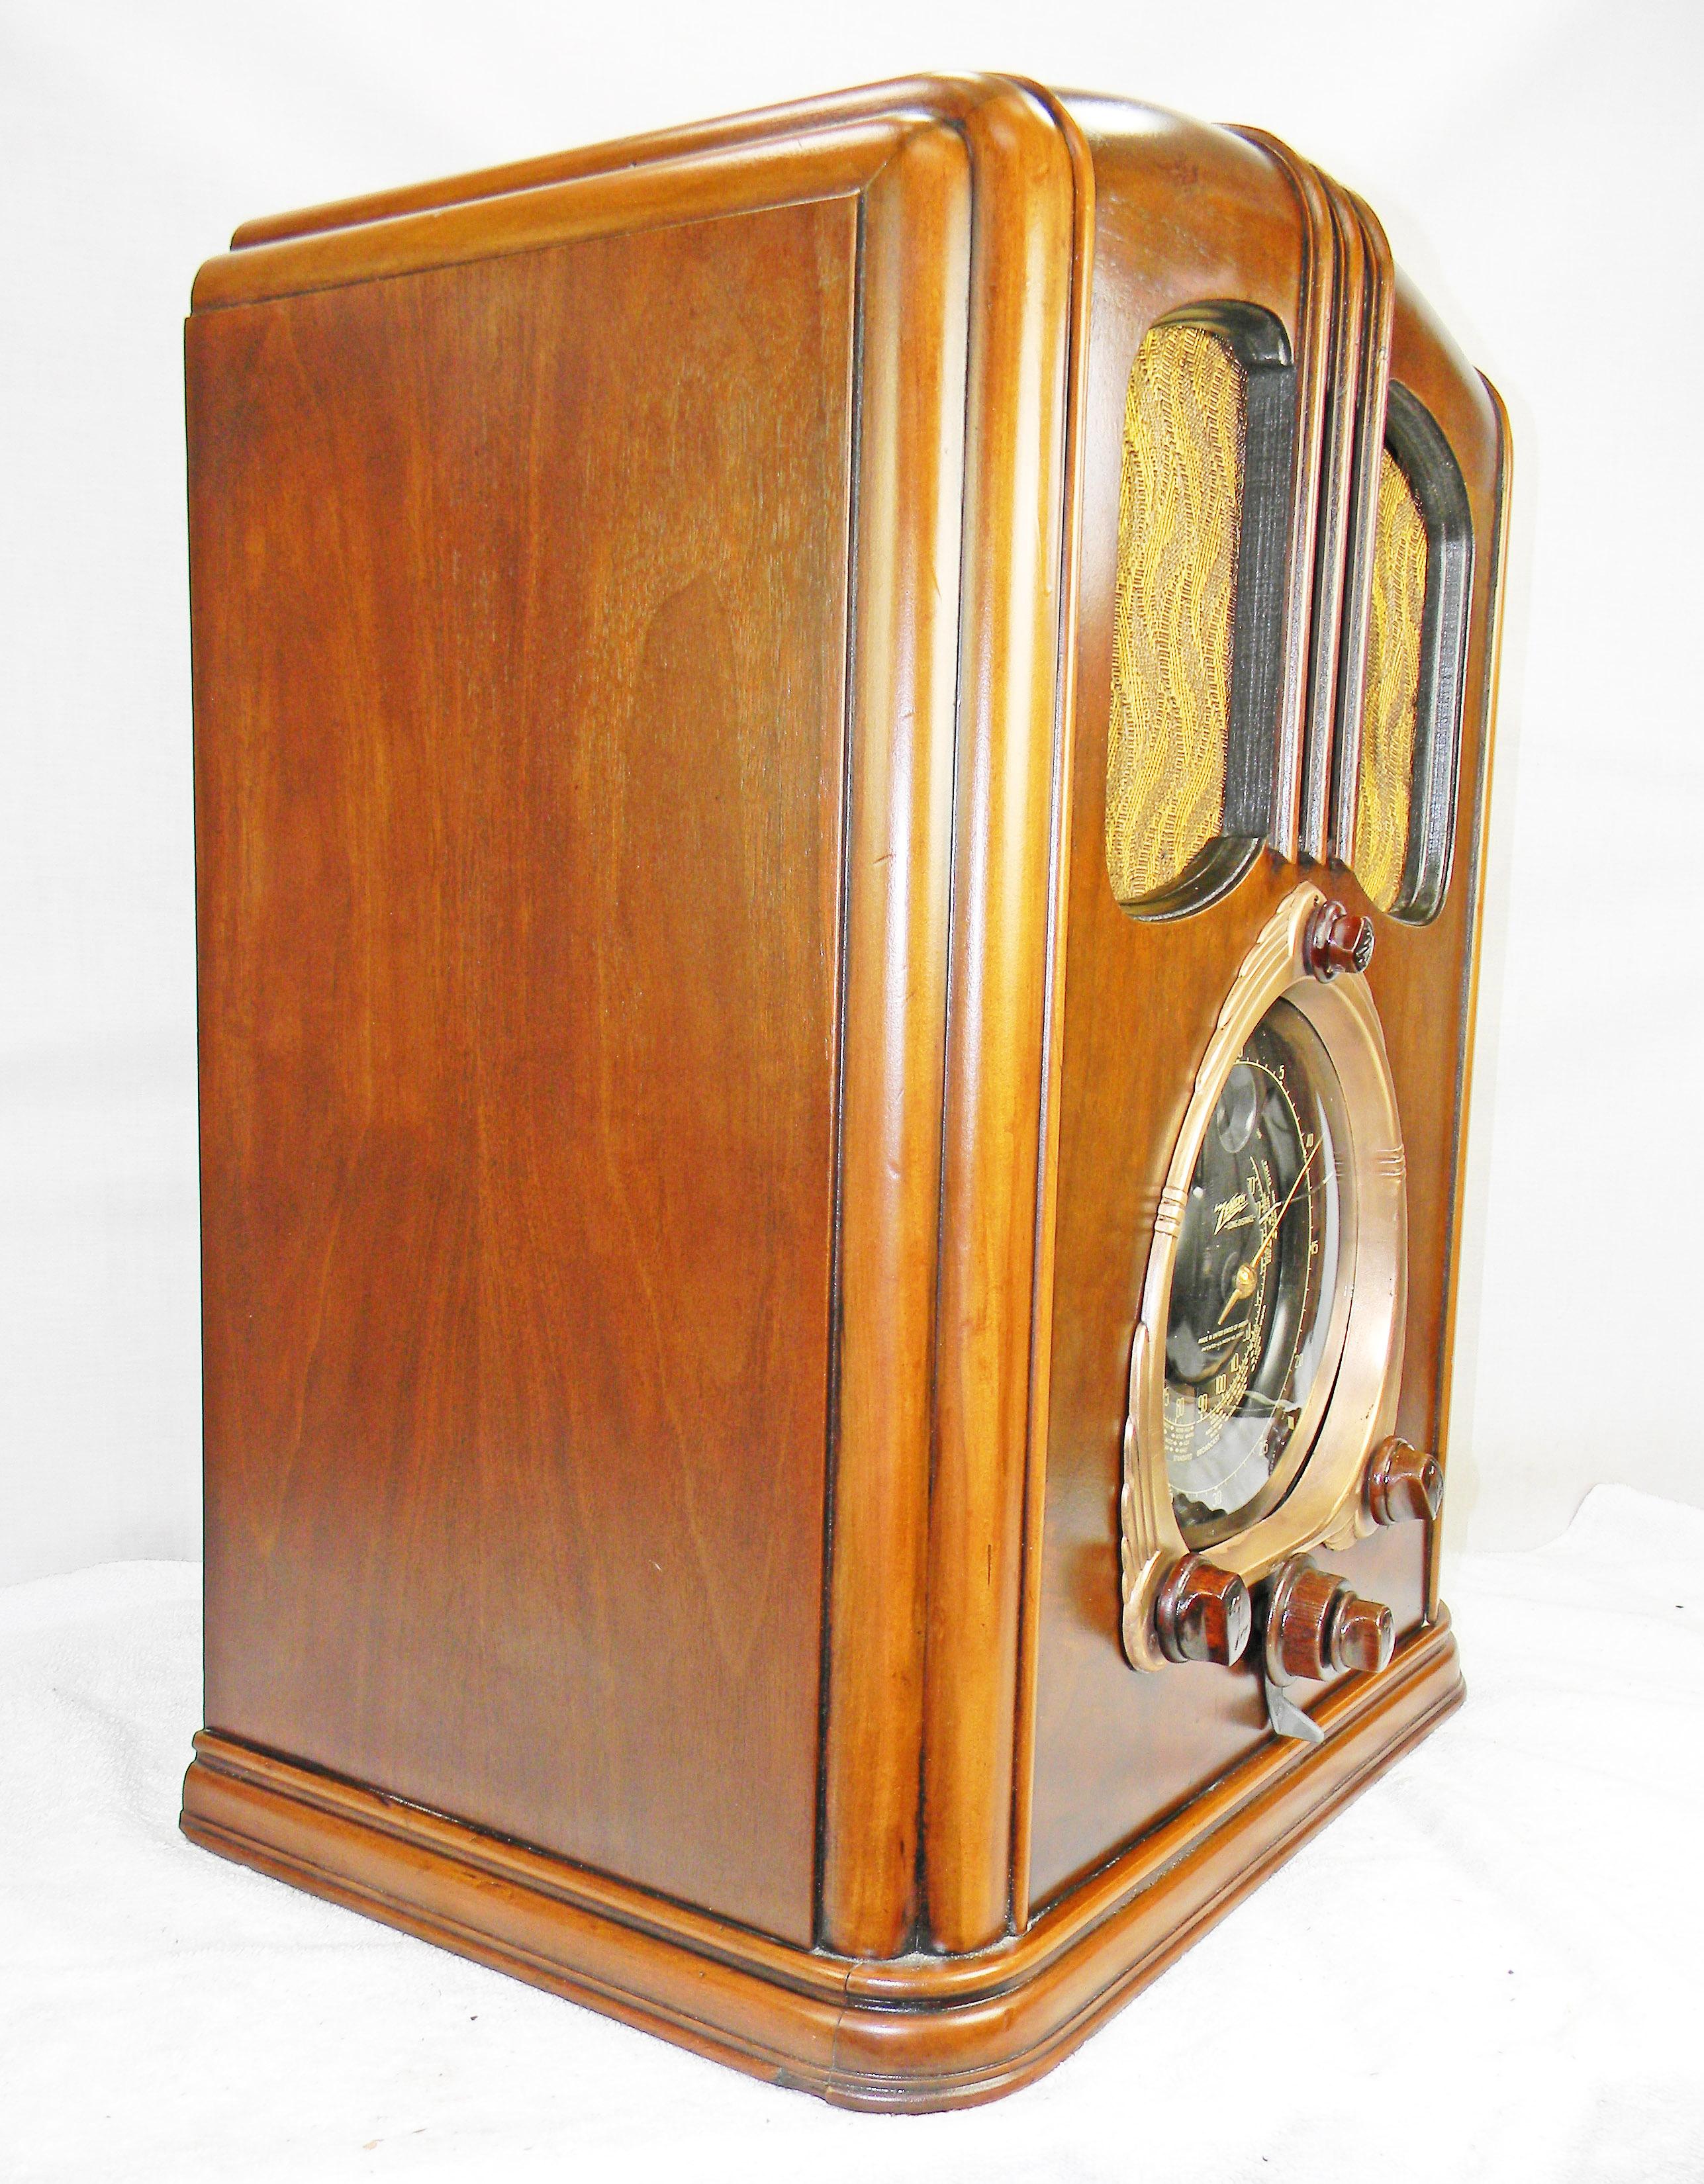 1938 Zenith “WALTON” 12-S-232 Shutter Dial Tombstone Art Deco Radio in pristine restored condition. The most sought after of all of these old radios and displayed on the popular television program “The Waltons”. This 9 tube Zenith is gorgeous!!